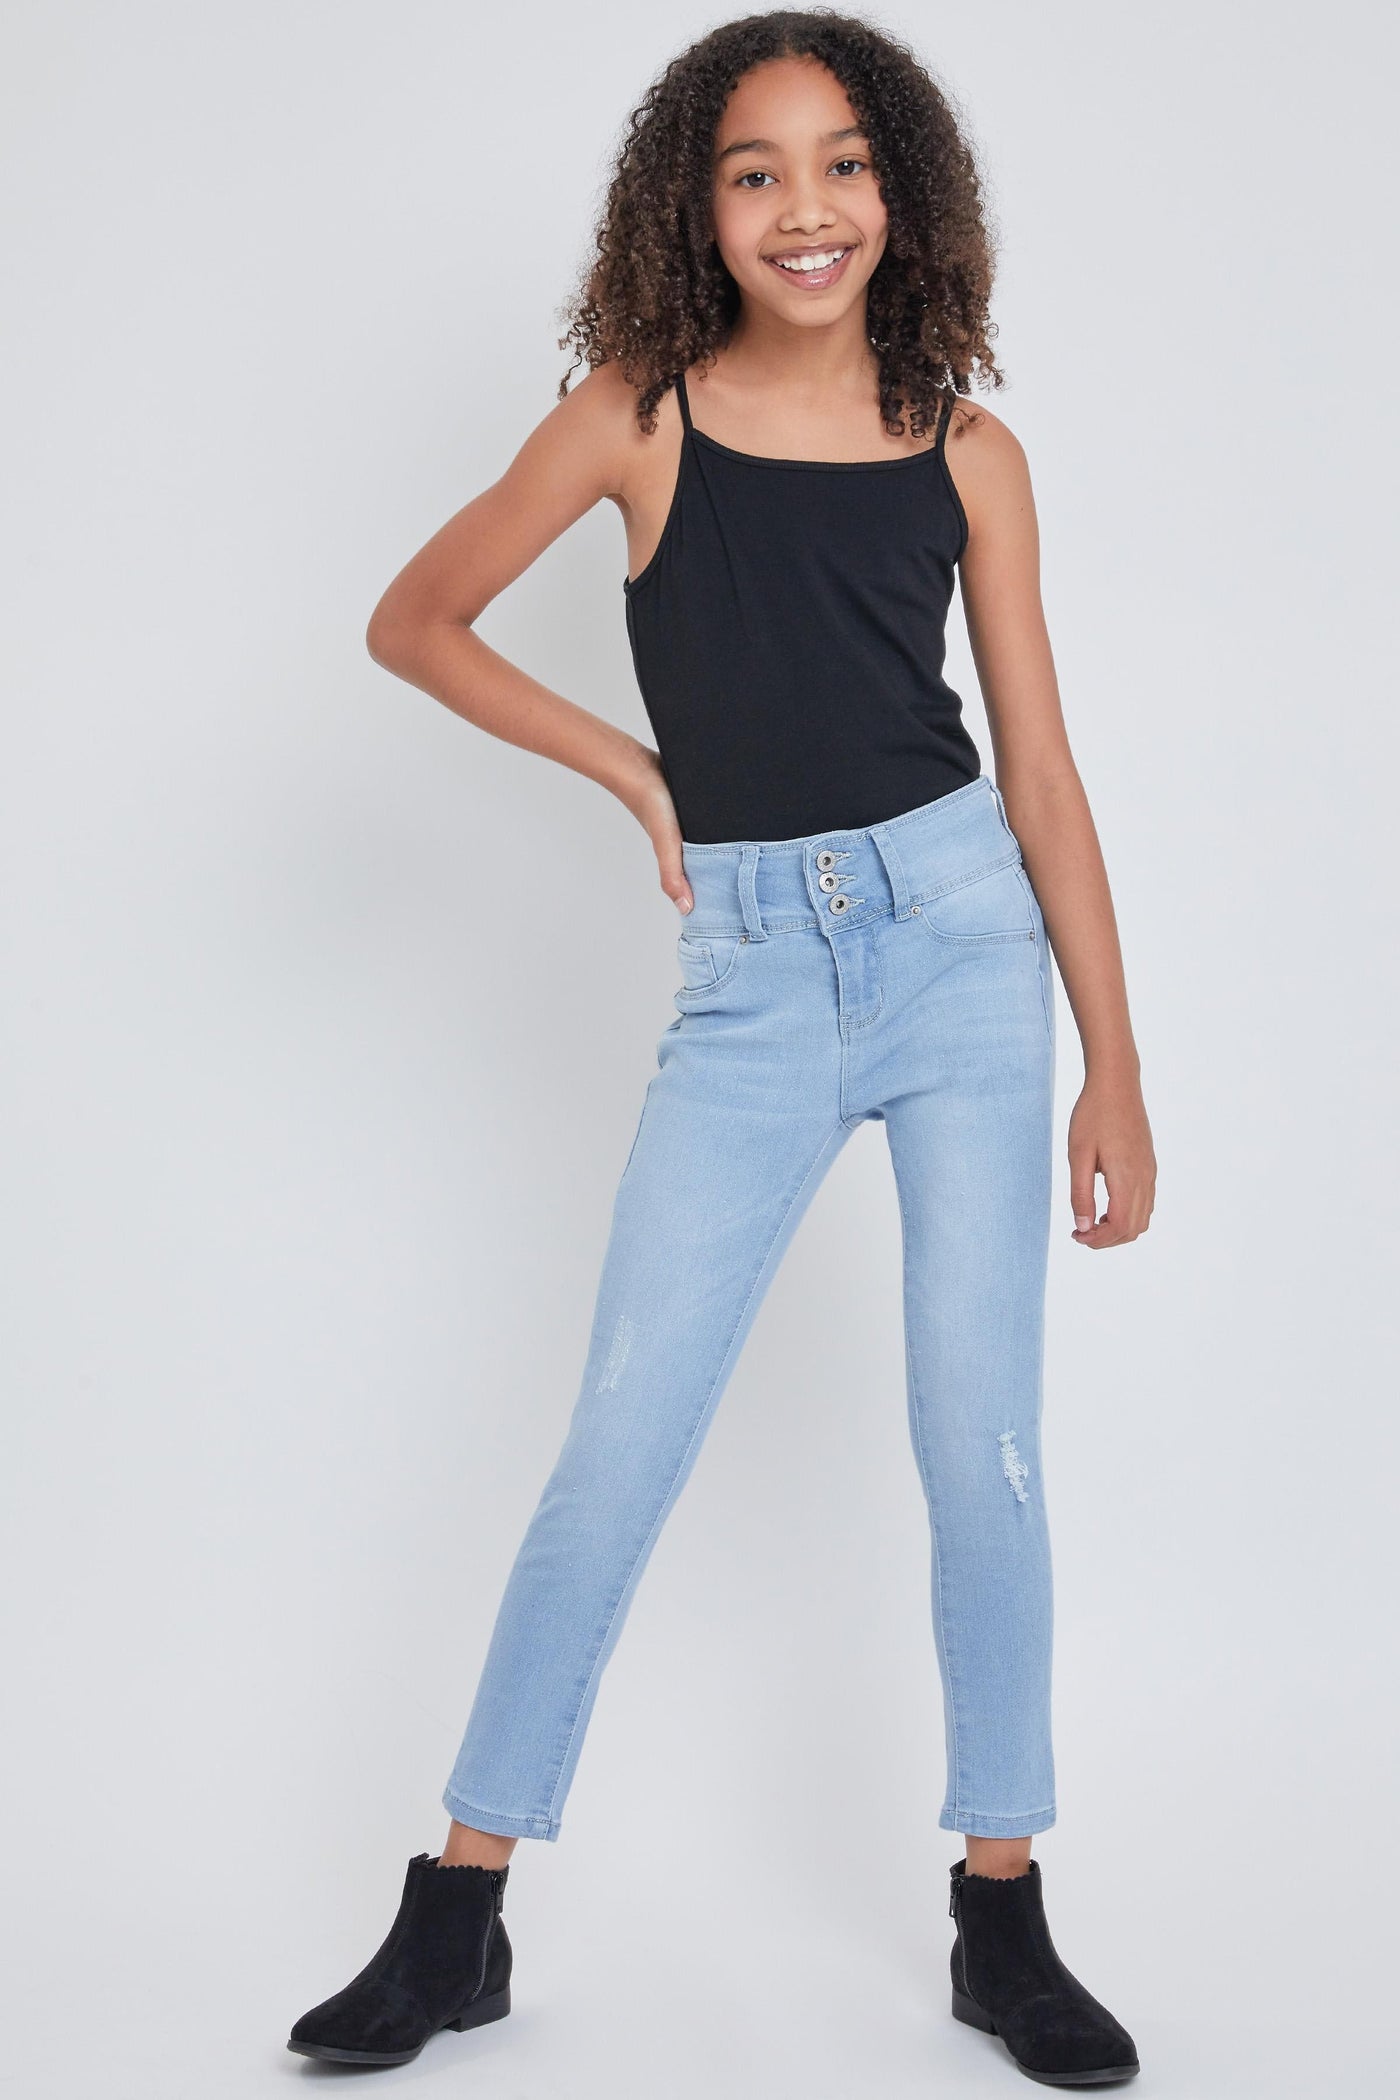 Girls WannaBettaFit 3-Button Skinny Cuffed Pant Made With Recycled Fibers from YMI